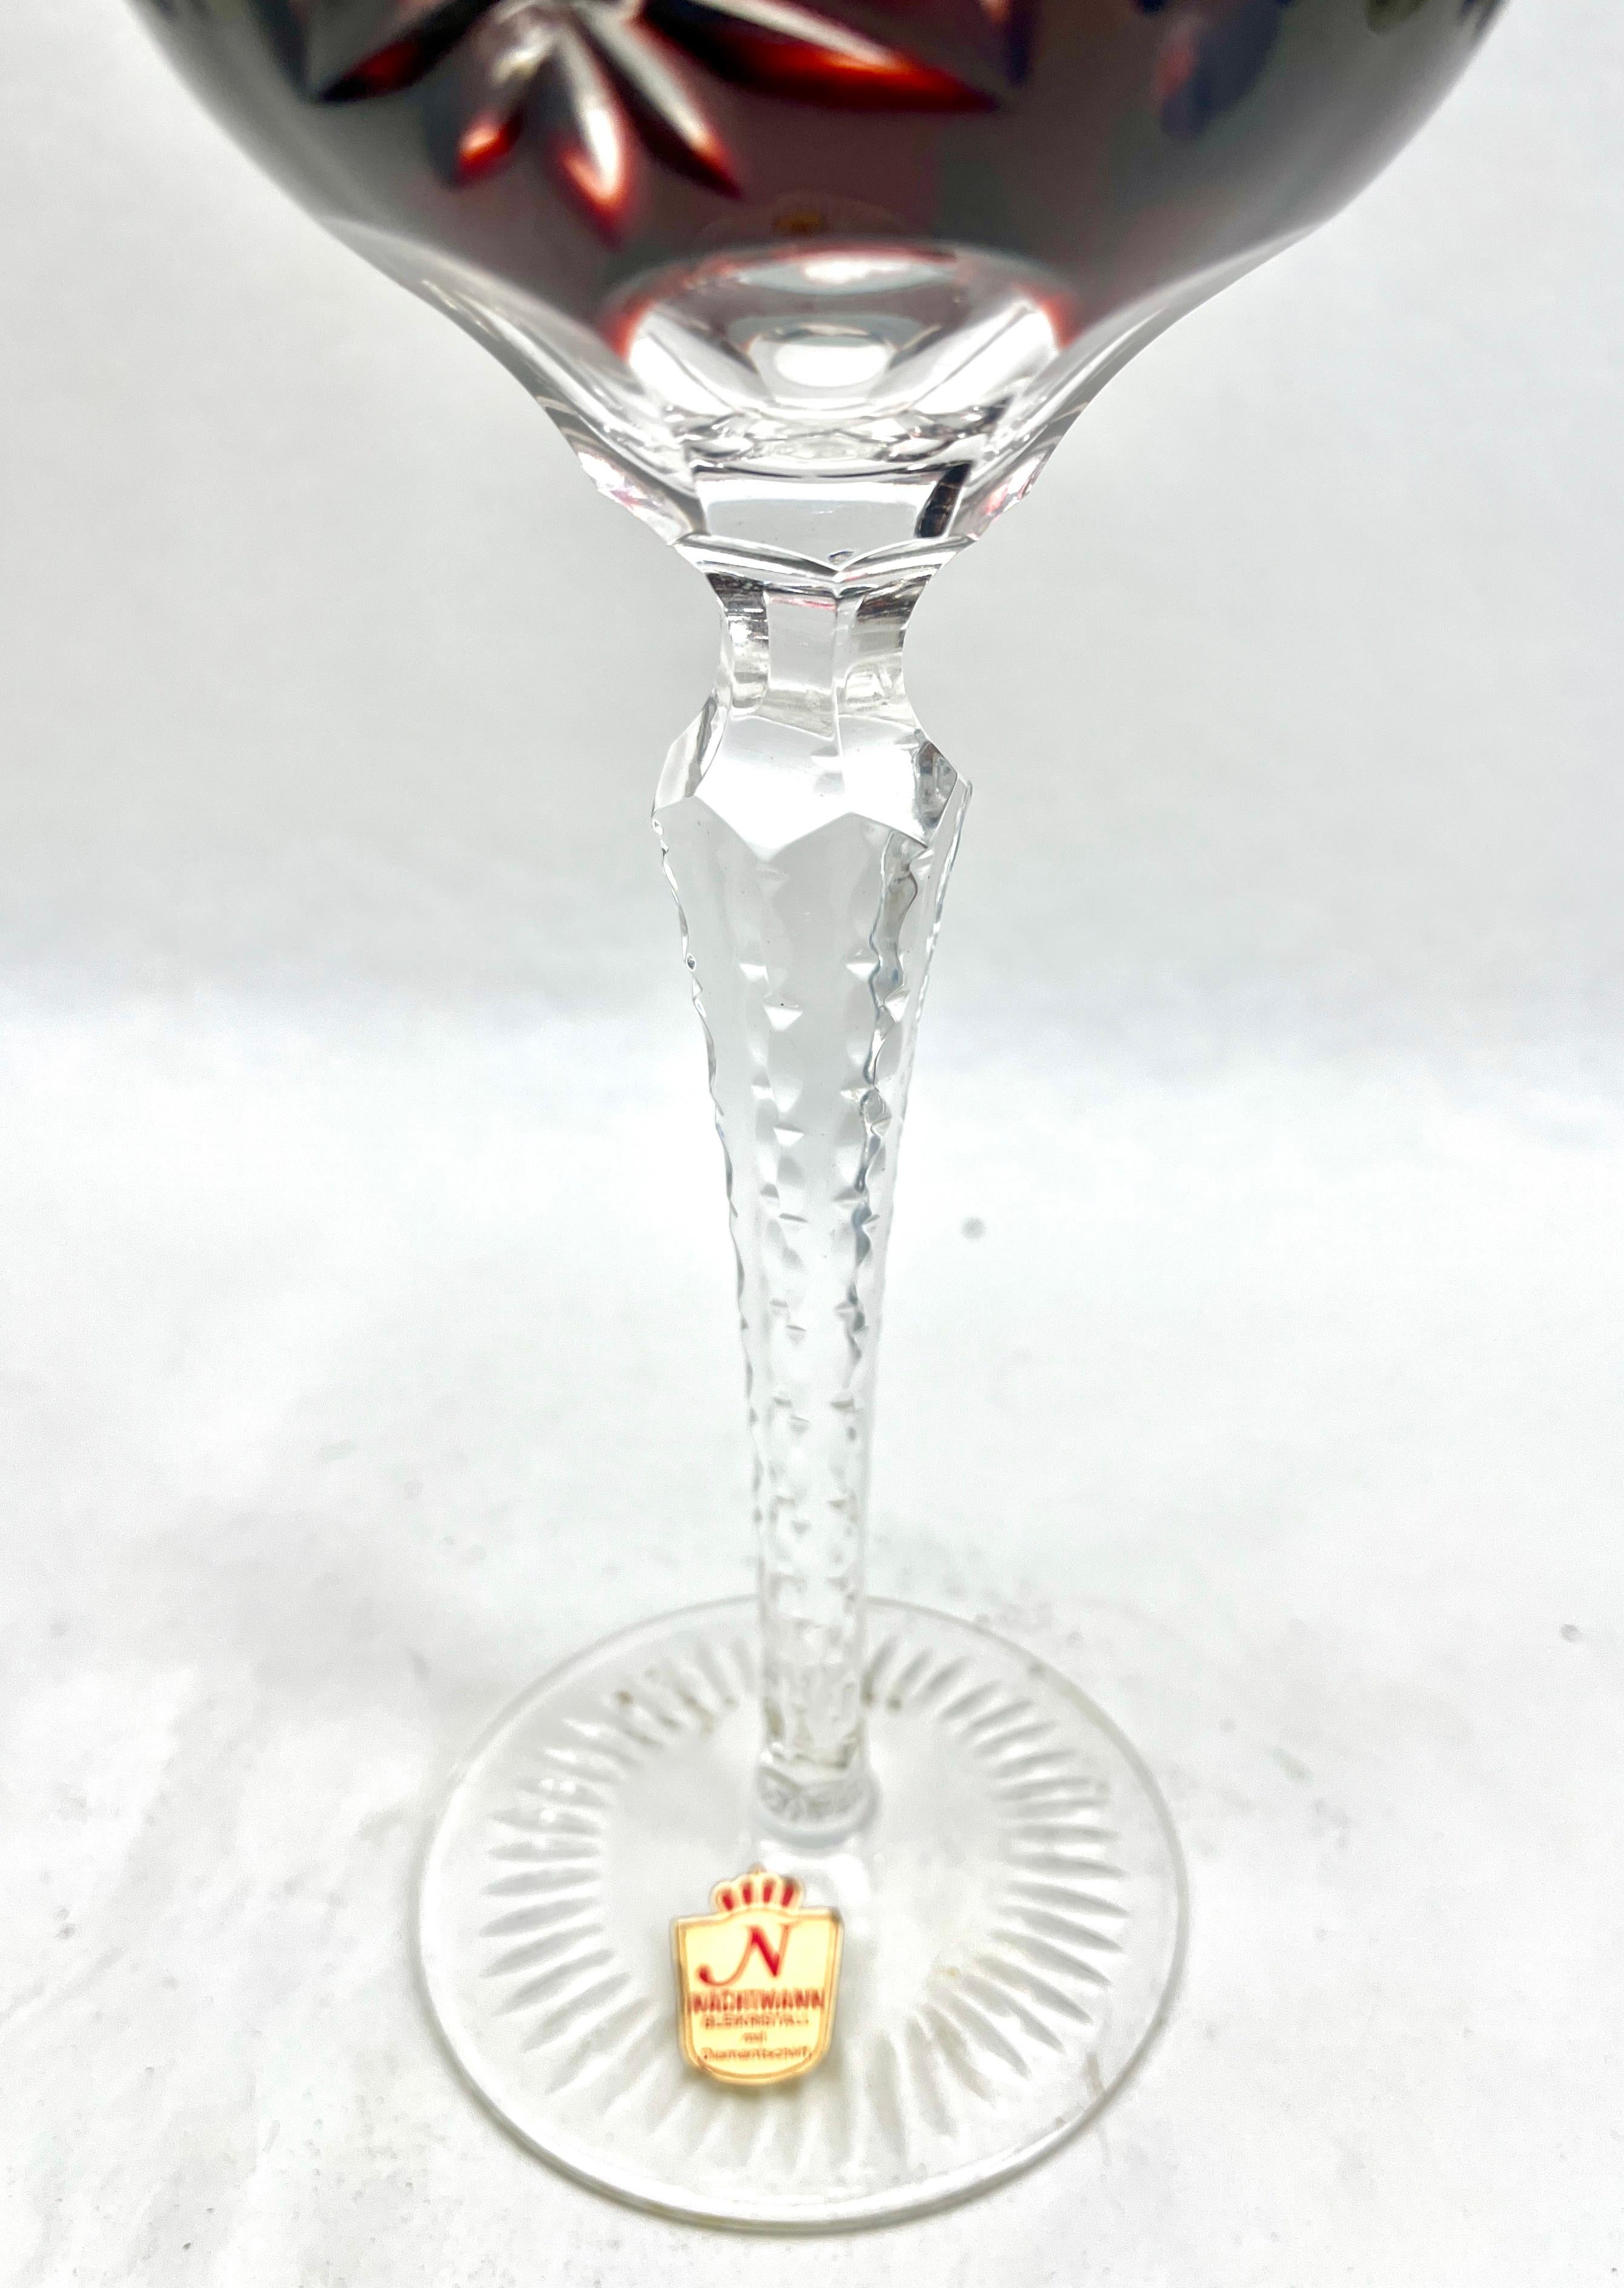 Crystal Set of 5 Nachtmann Label Stem Glasses with Overlay Cut to Clear For Sale 2